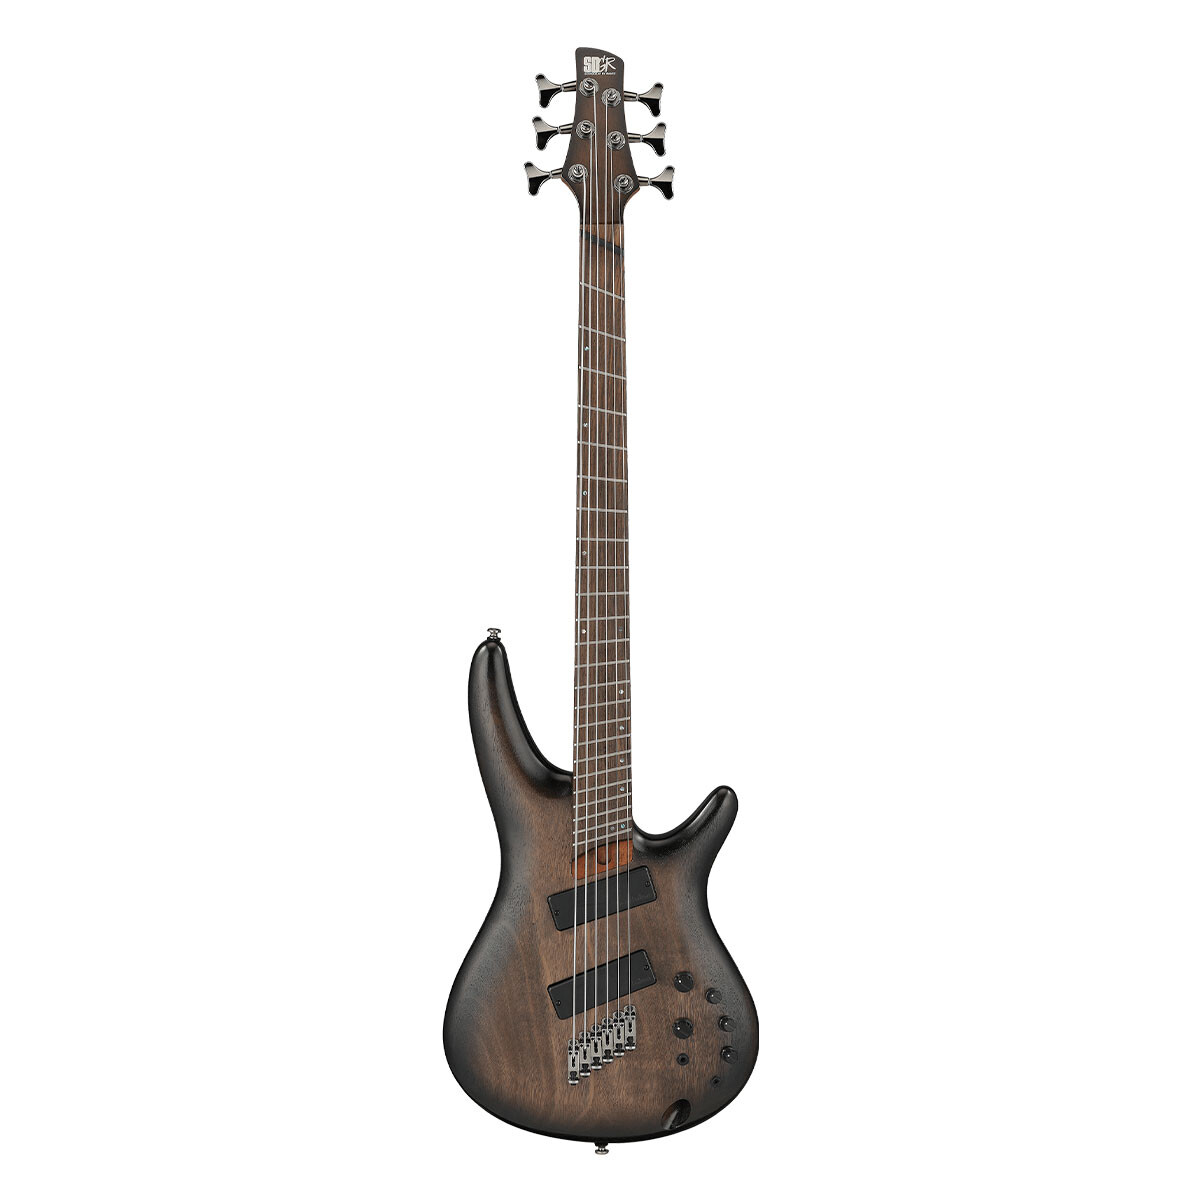 BAJO ELECTRICO IBANEZ SRC6MSBLL BLACK STAINED BURST LOW GLOSS 